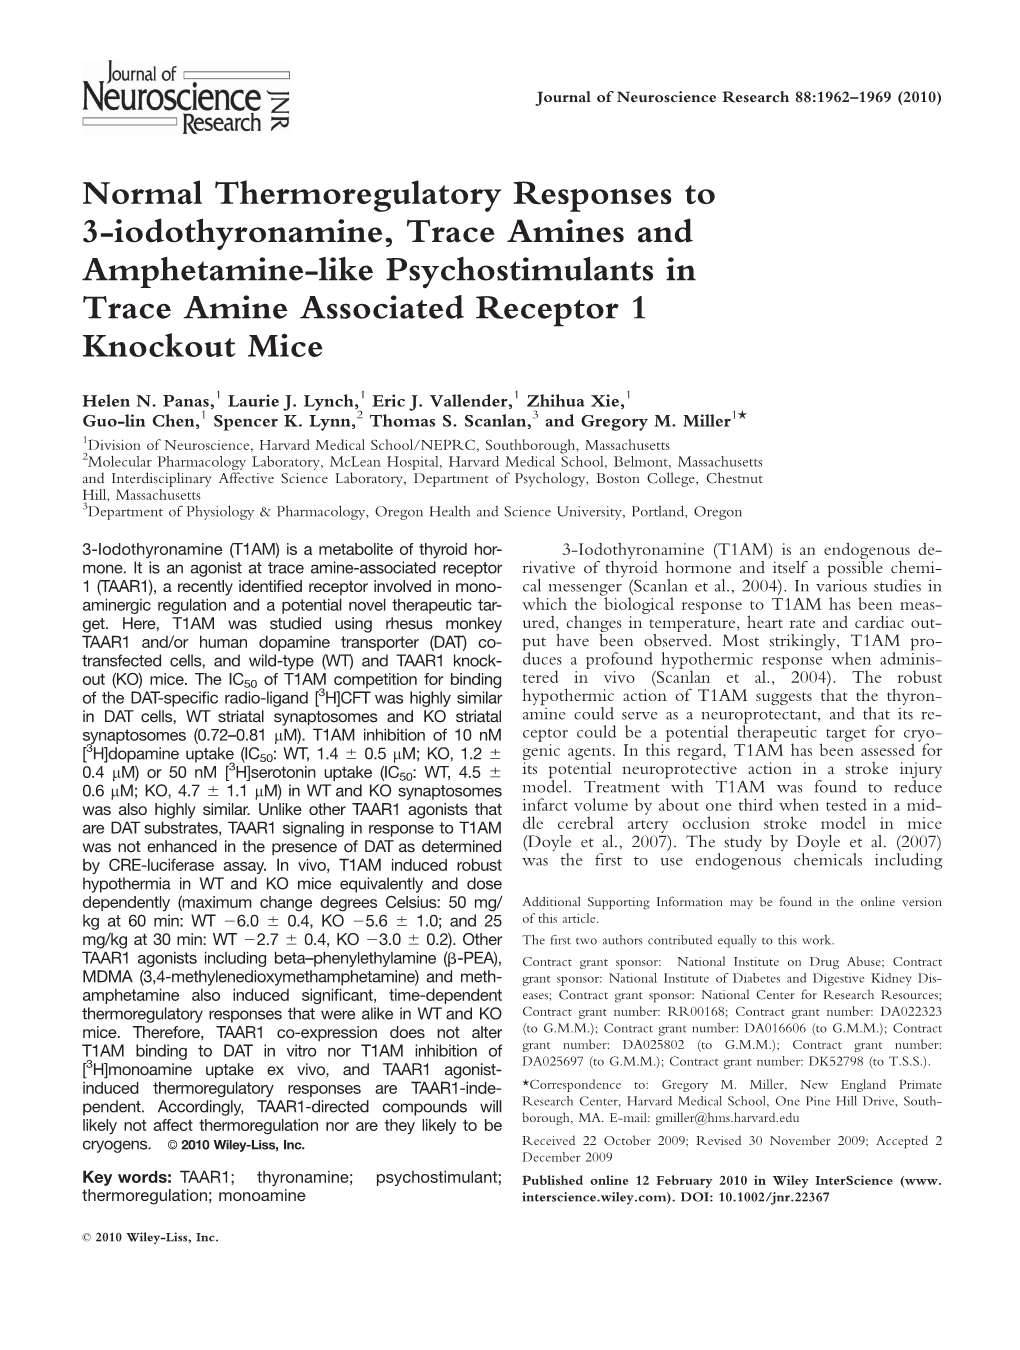 Normal Thermoregulatory Responses to 3-Iodothyronamine, Trace Amines and Amphetamine-Like Psychostimulants in Trace Amine Associated Receptor 1 Knockout Mice